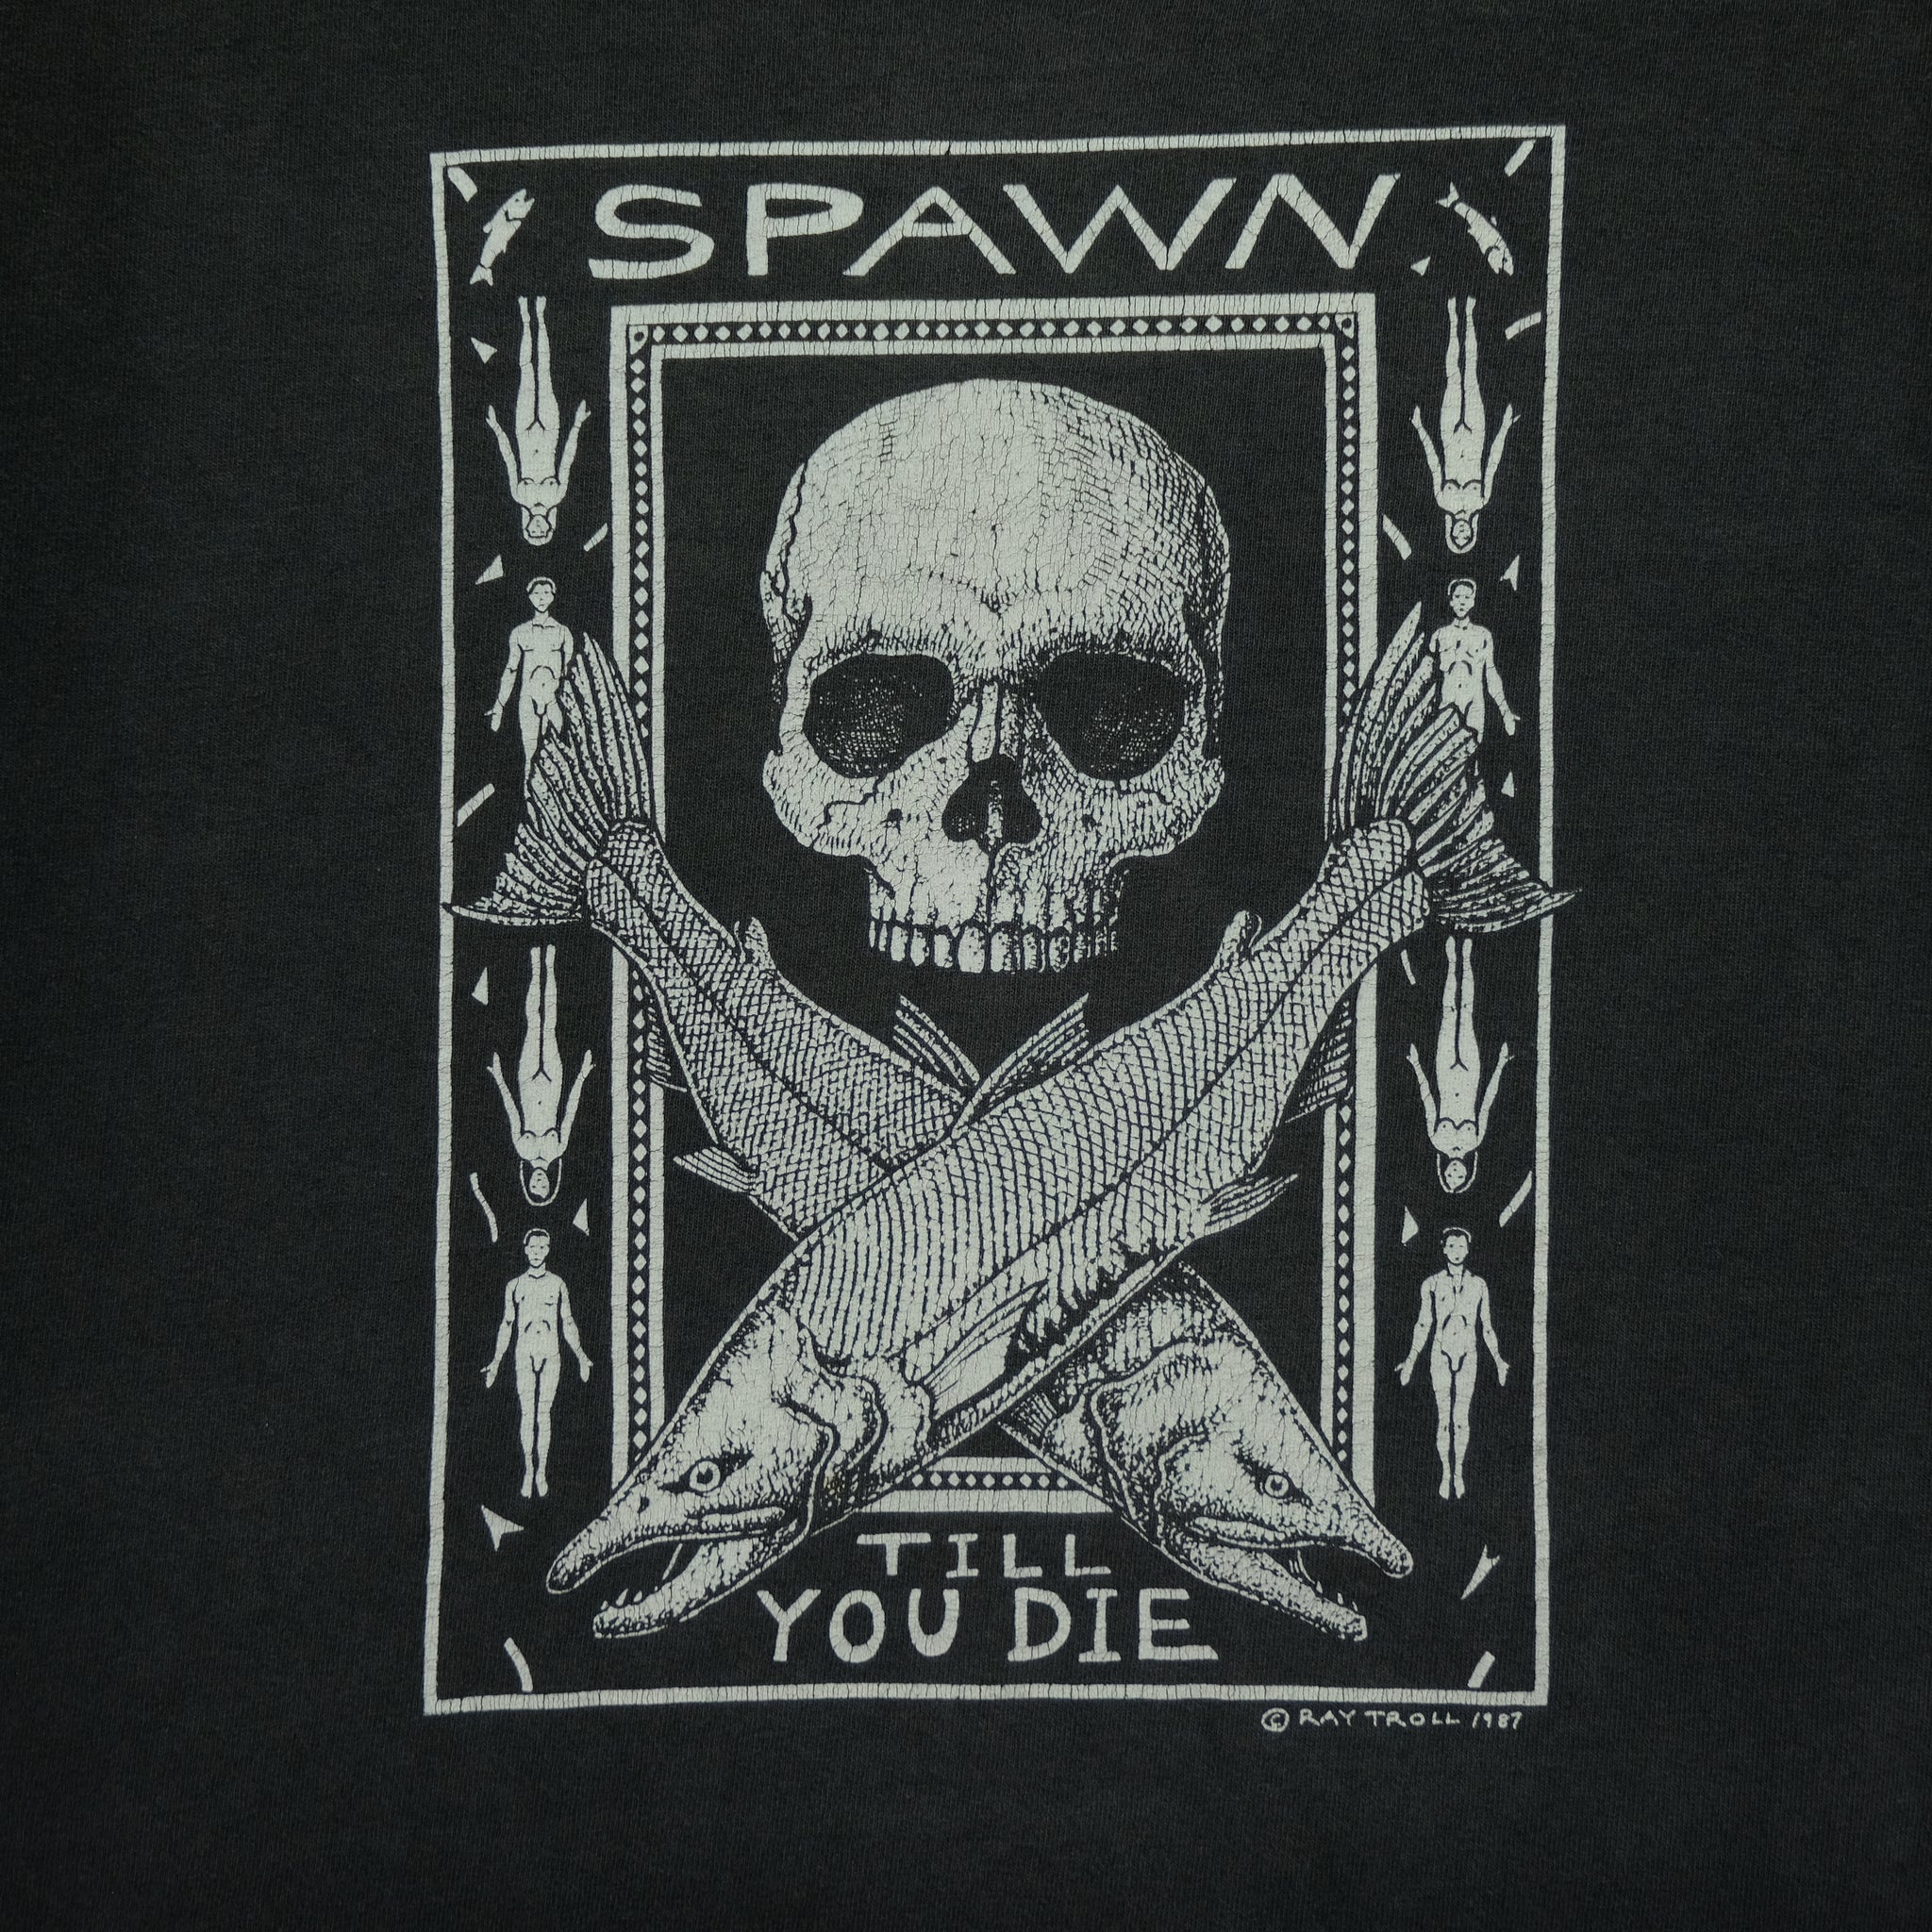 Vintage 1987 Spawn Till You Die Ray Troll Art Tee, Reset Vintage Shirts, BUY • SELL • TRADE